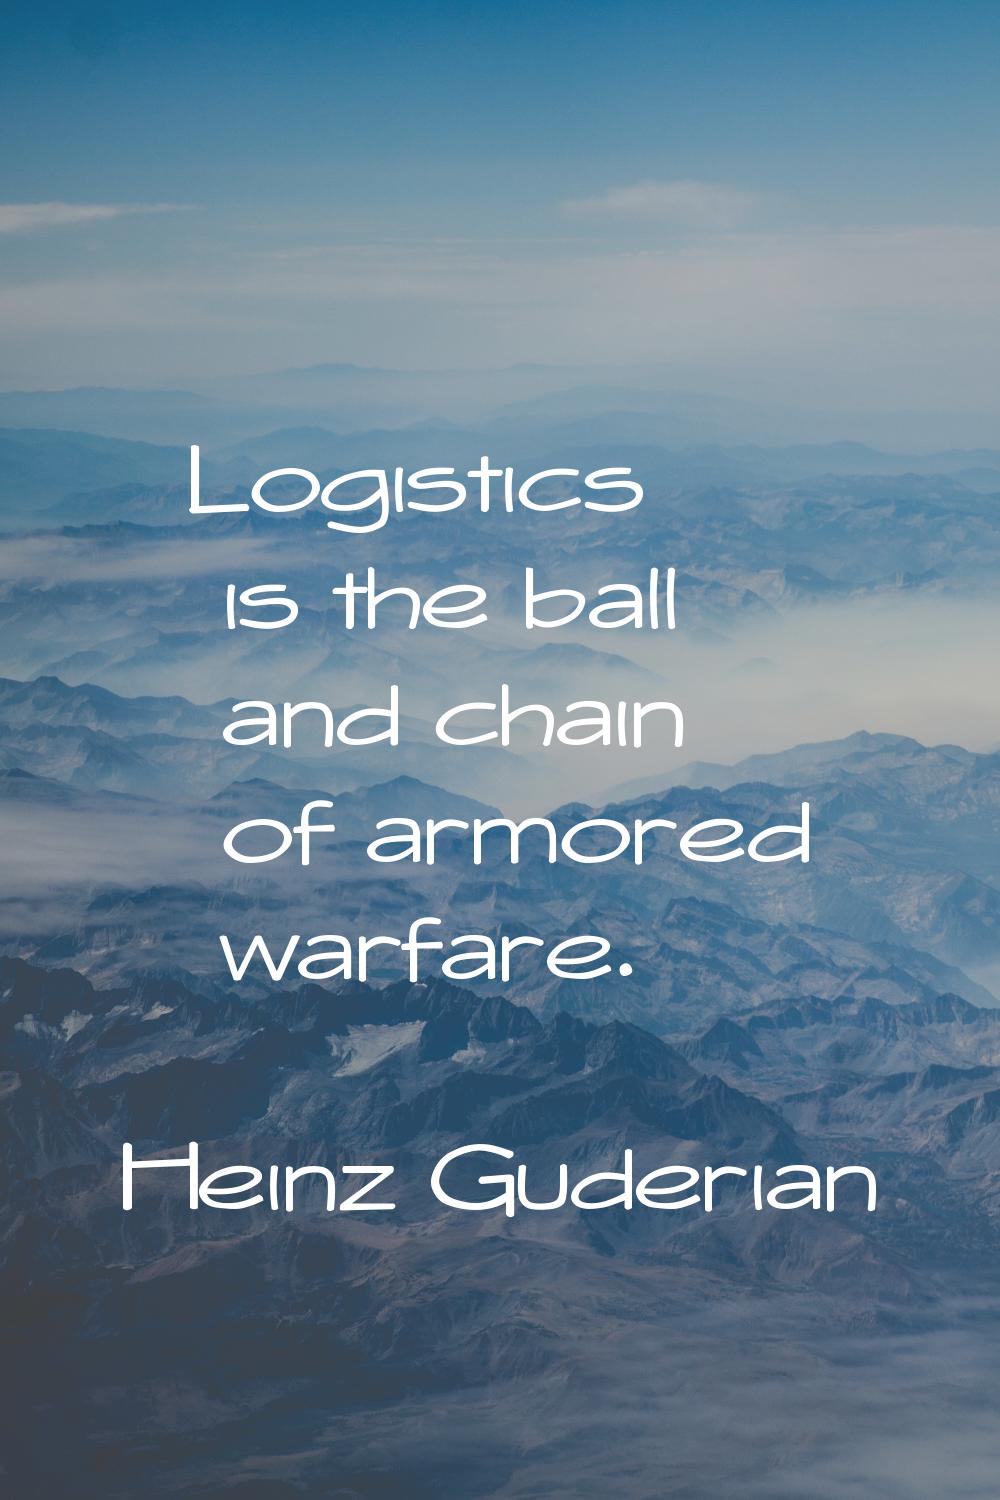 Logistics is the ball and chain of armored warfare.